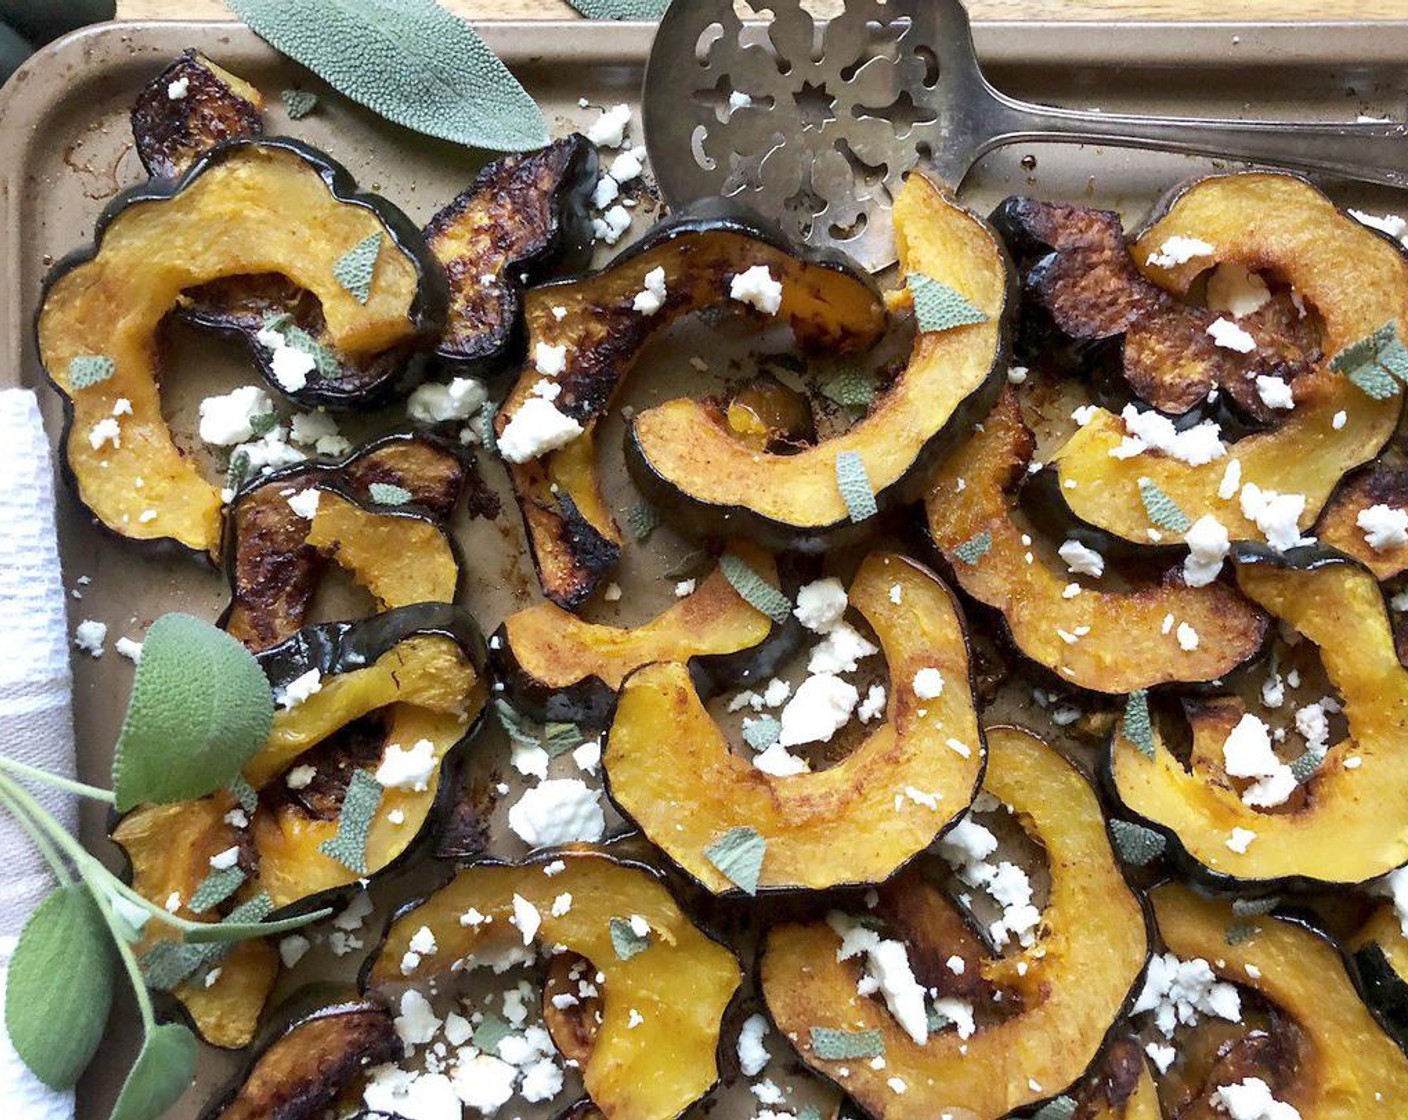 Spicy Roasted Acorn Squash with Feta Crumbles